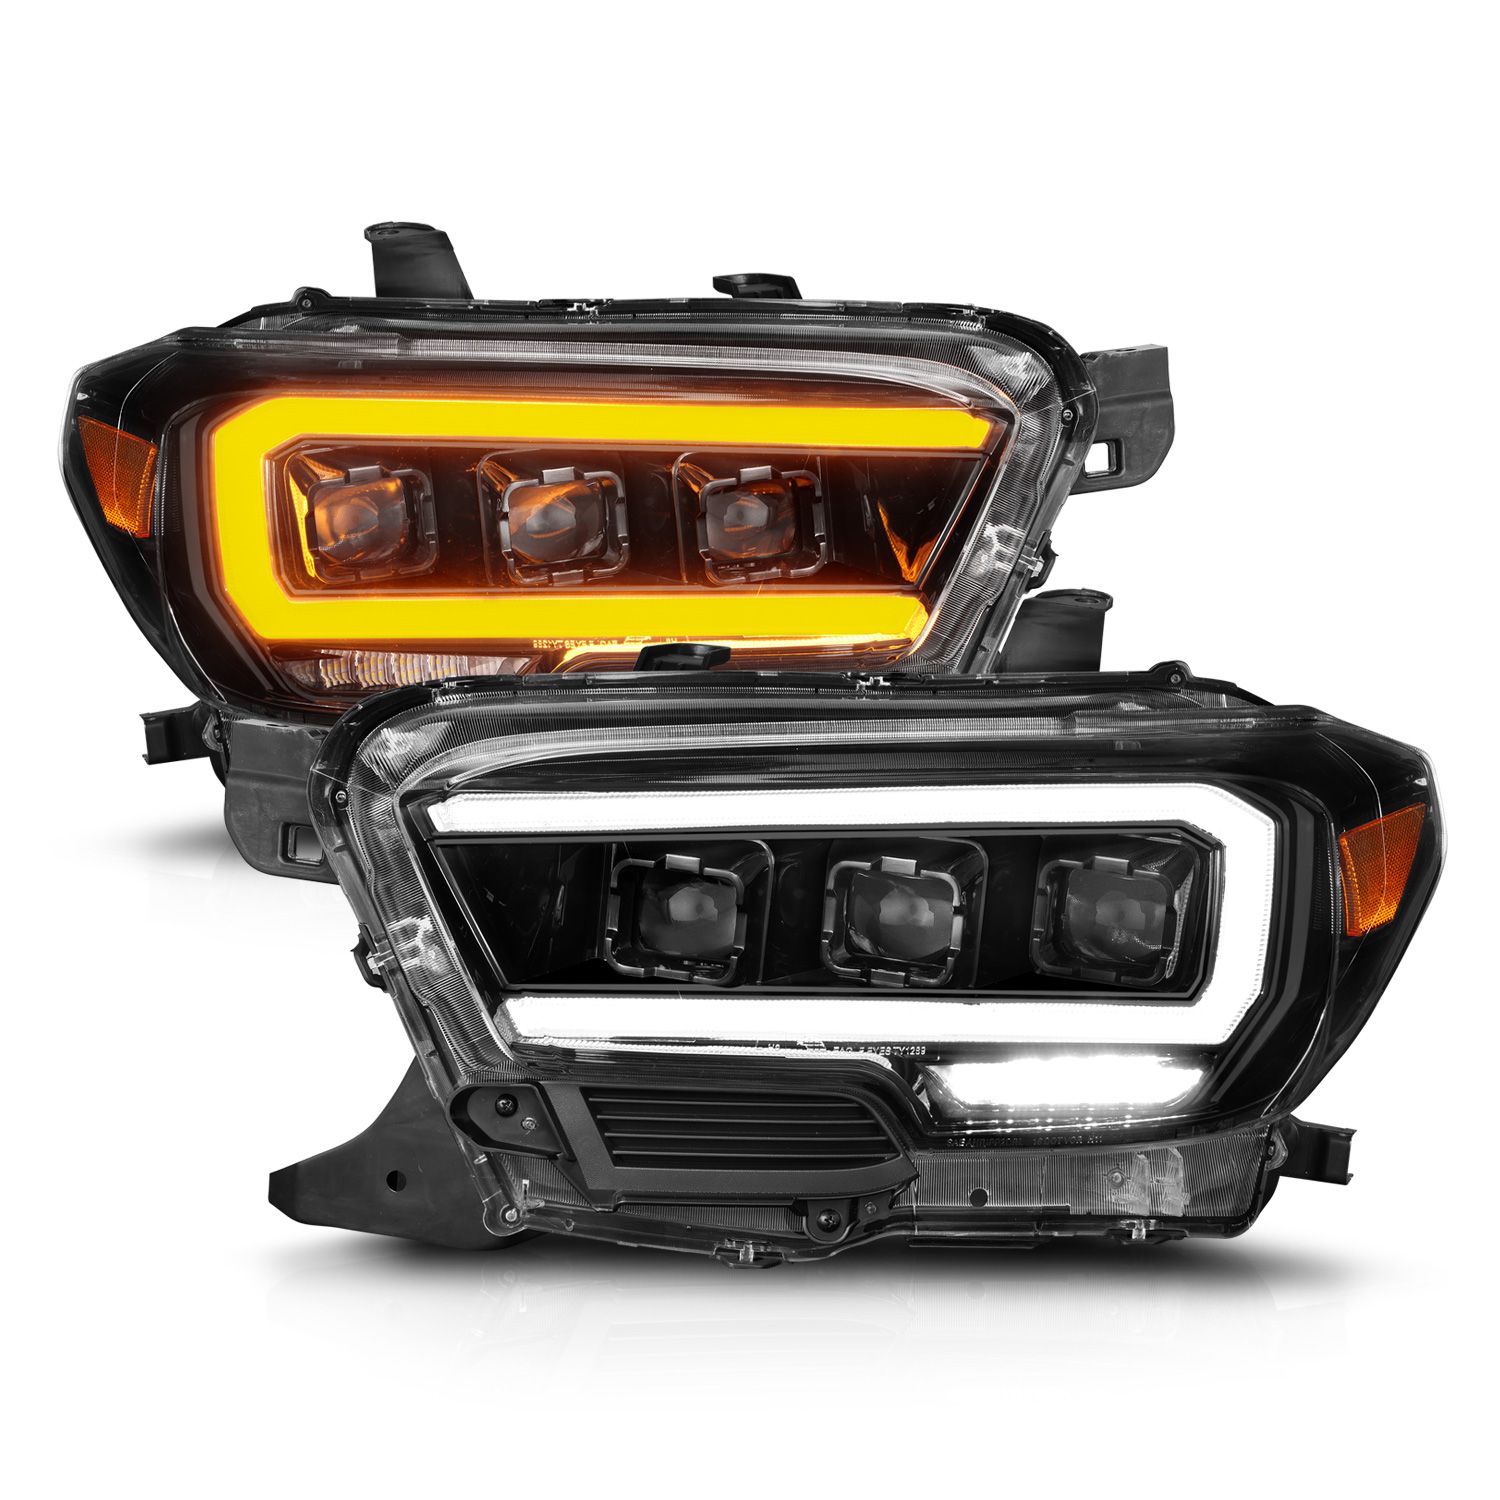 Full LED Projector Headlights With Sequential Turn Signals (LED DRL) Toyota Tacoma 2016-2022 - Mid-Atlantic Off-Roading